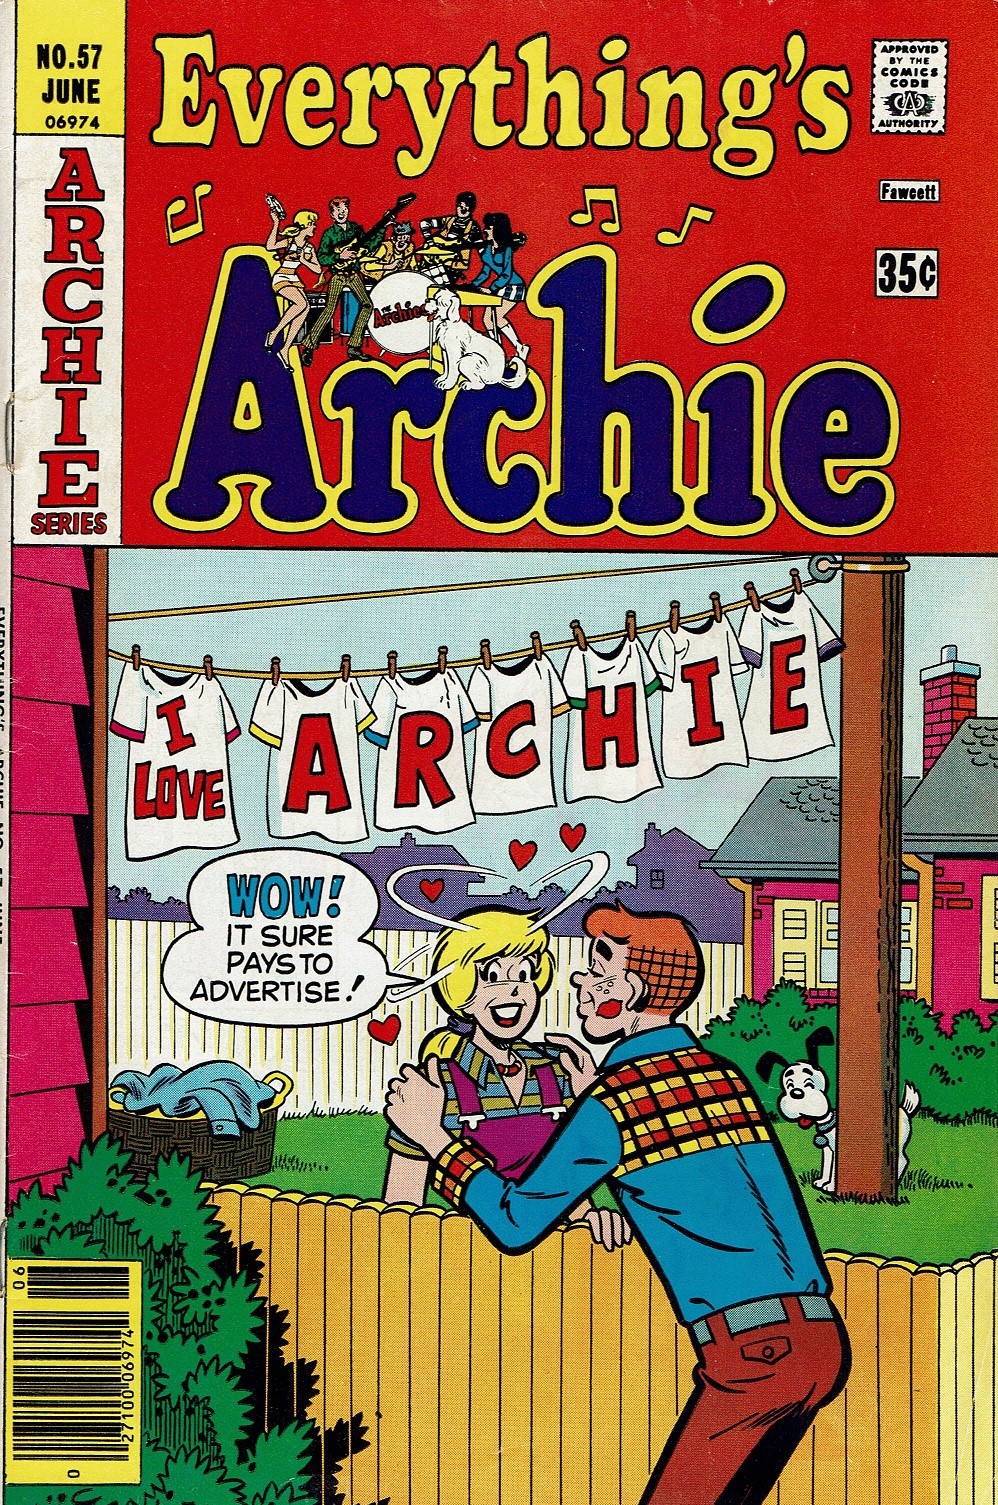 Read online Everything's Archie comic -  Issue #57 - 1